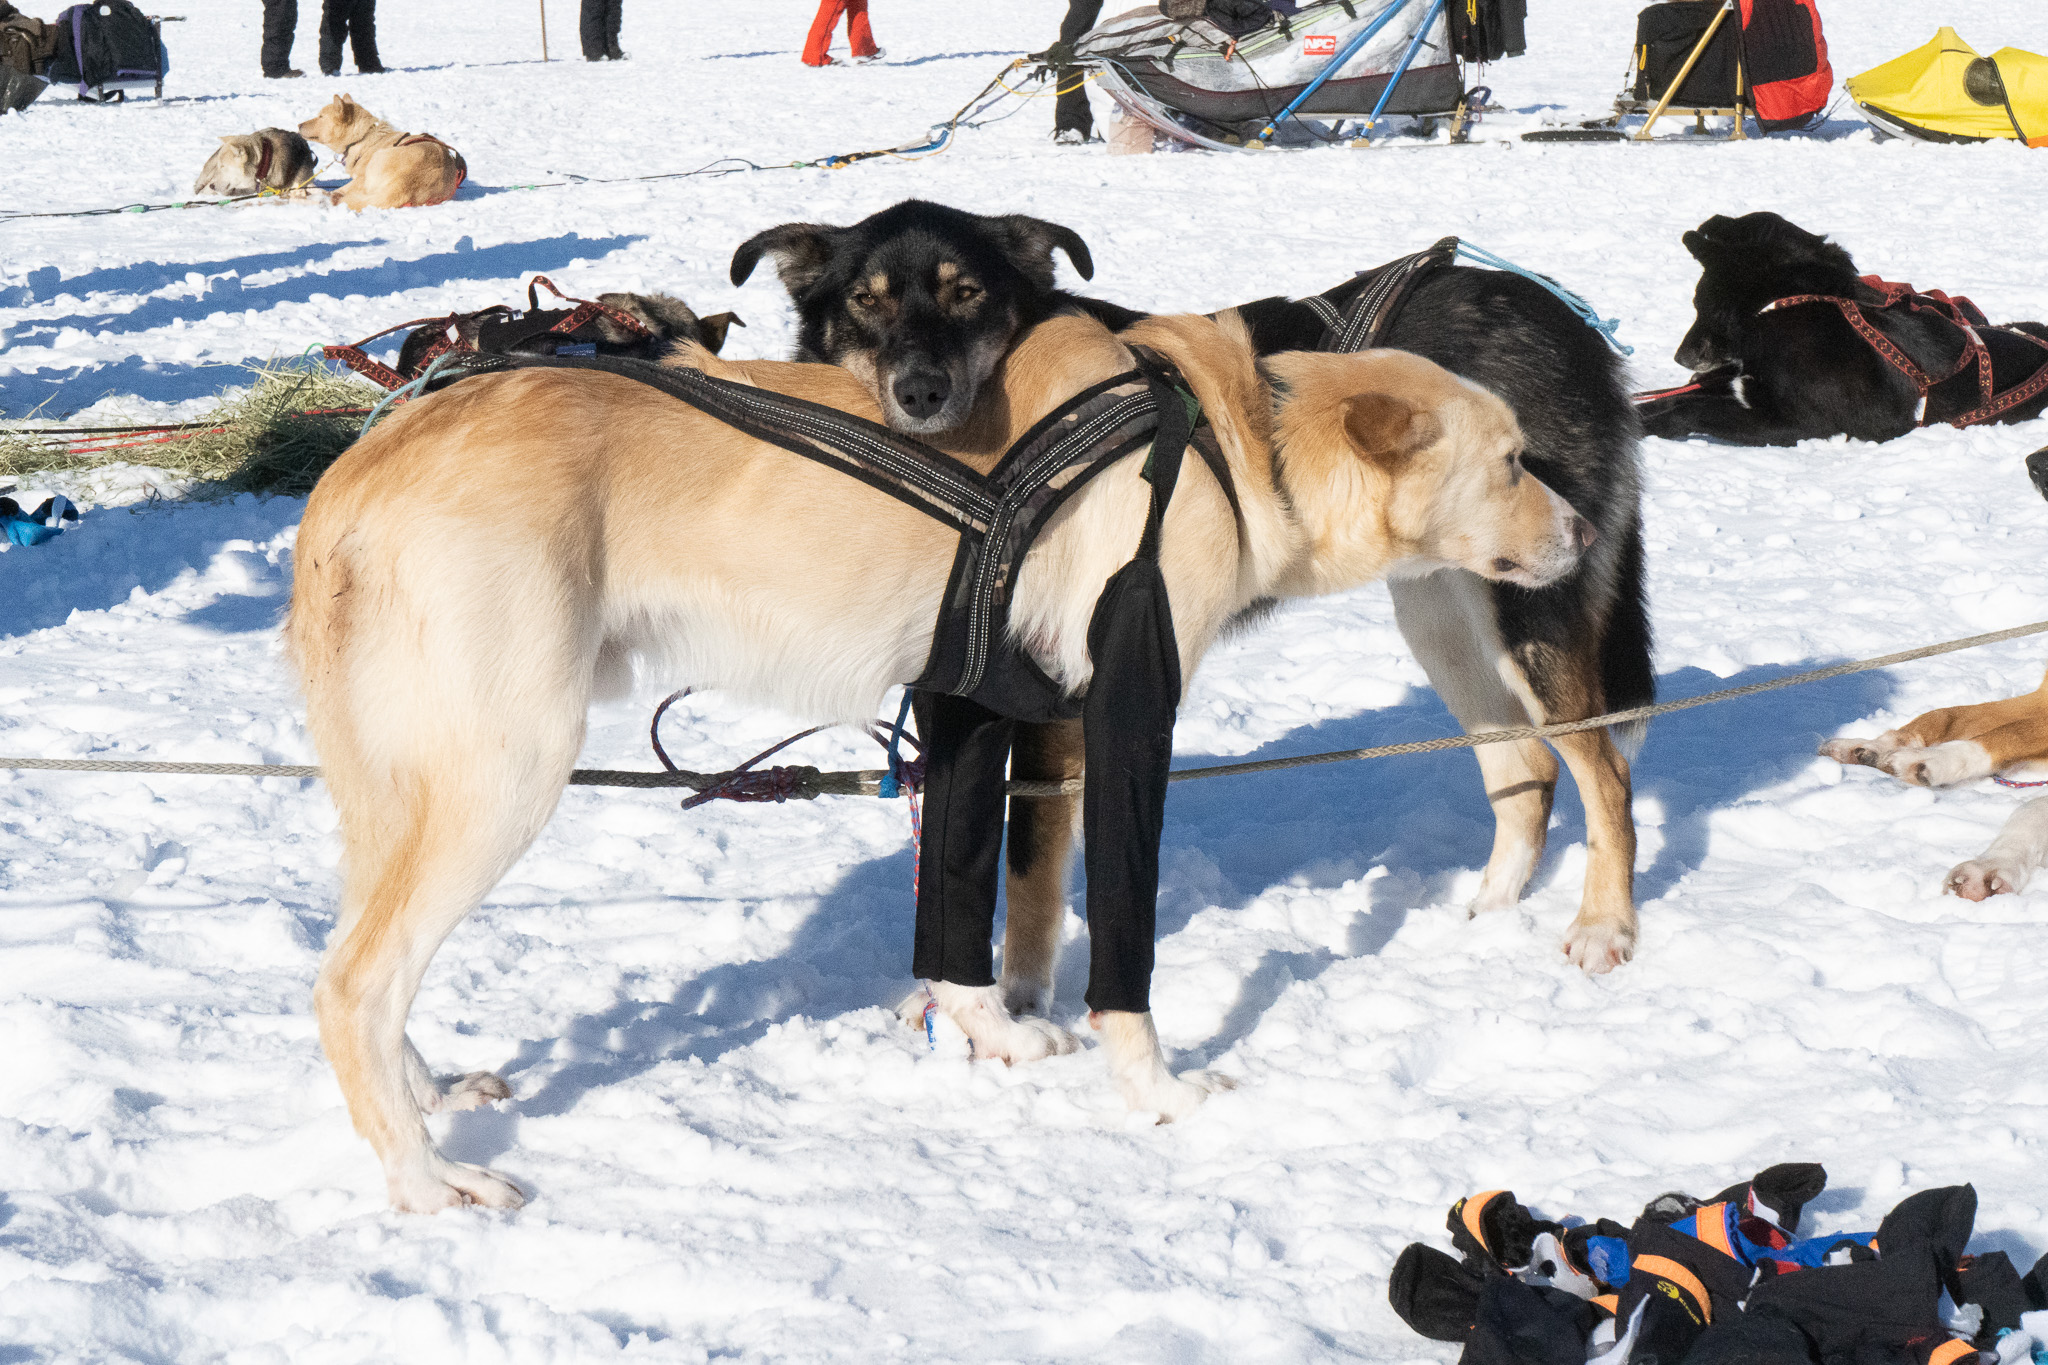 A black dogs rests it's head on a blond dog in some snow